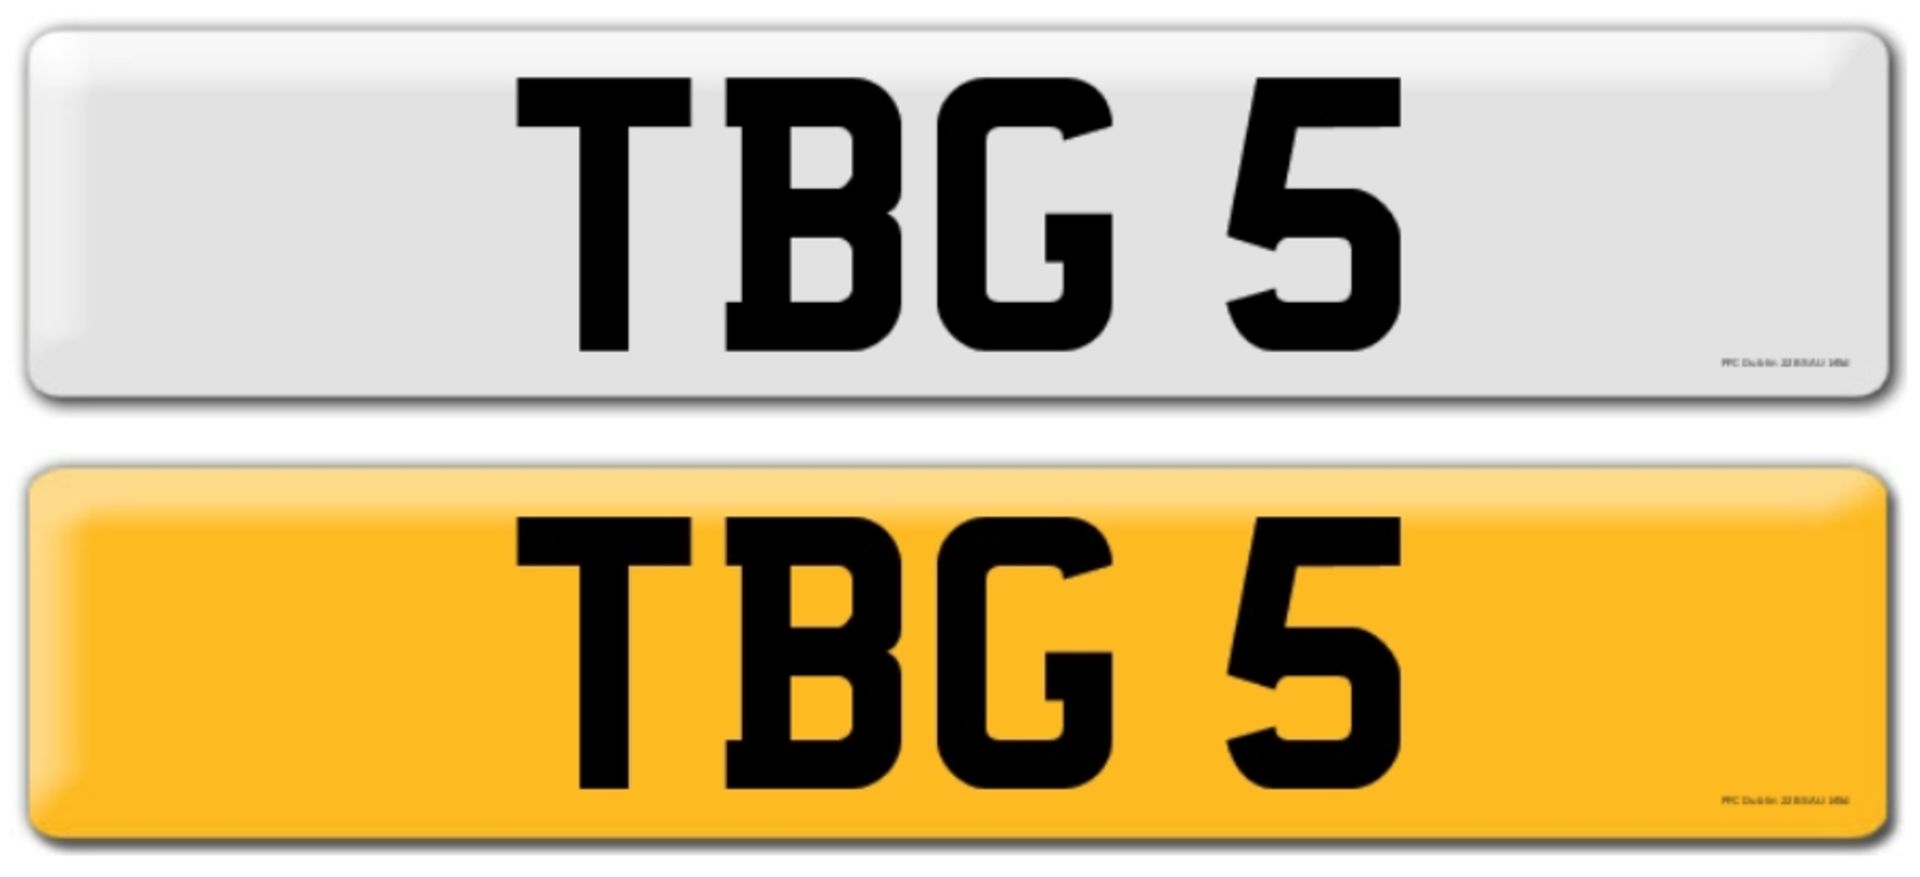 Registration on DVLA retention certificate, ready to transfer TBG 5, This number plate /